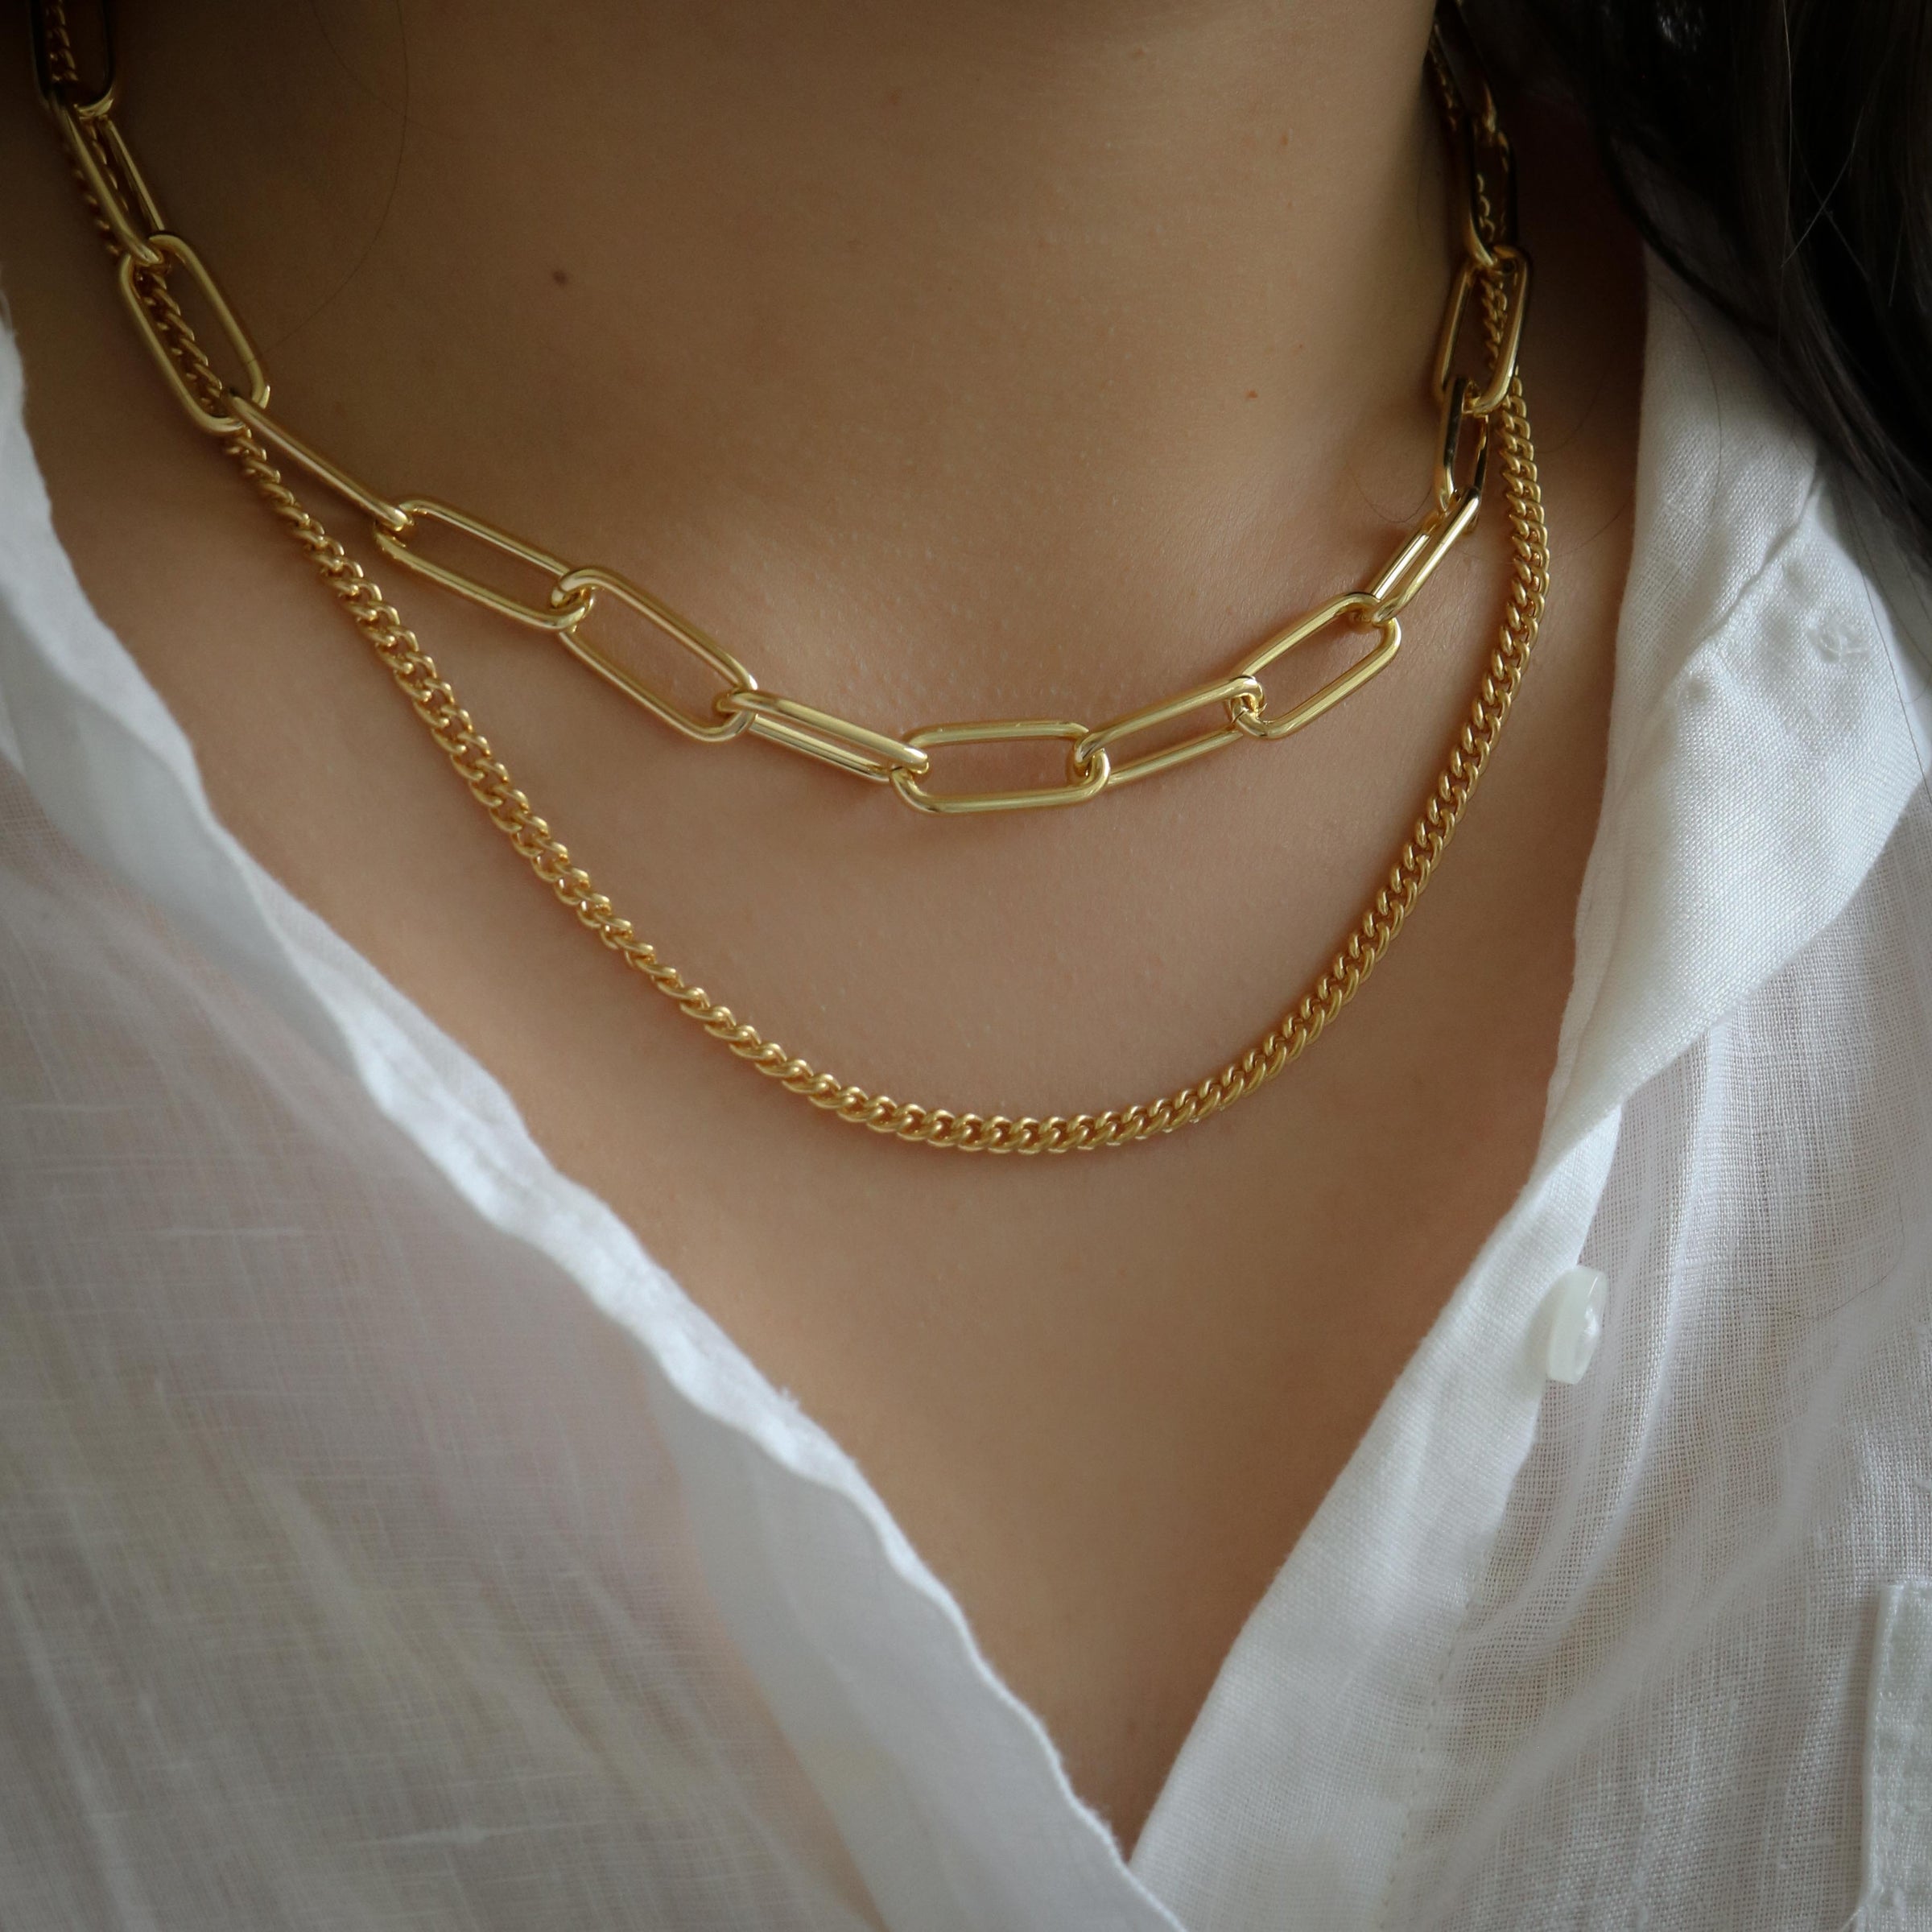 Why Does My Necklace Keeps Twisting? – Fetchthelove Inc.